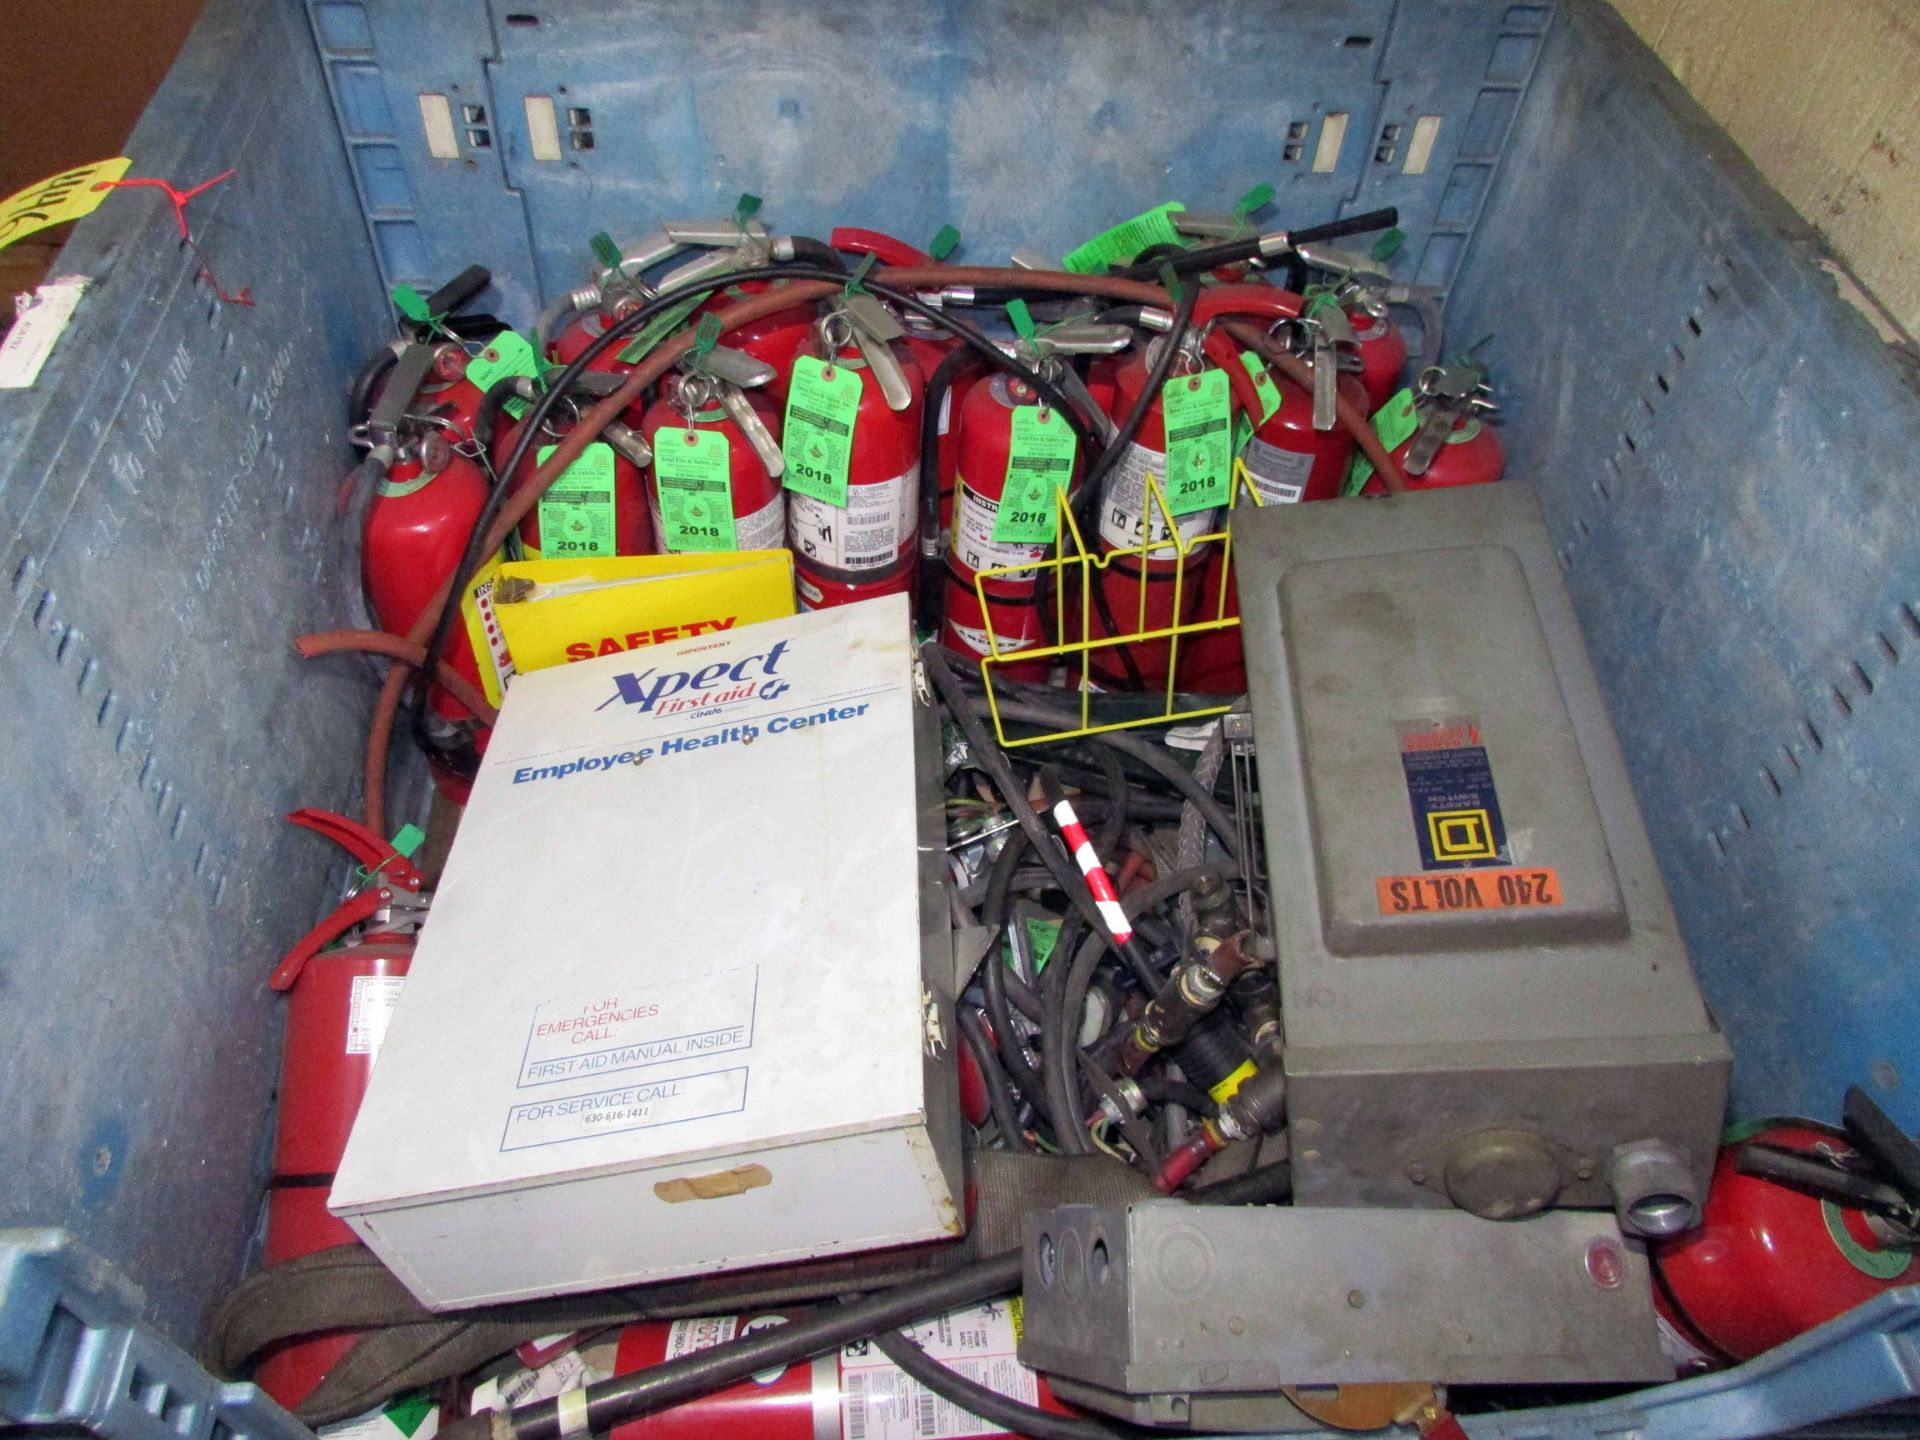 LOT OF SPARE PARTS & CONTENTS, (3) PALLETS: drive belts, hose, Fanuc robot controller, electrical - Image 6 of 6